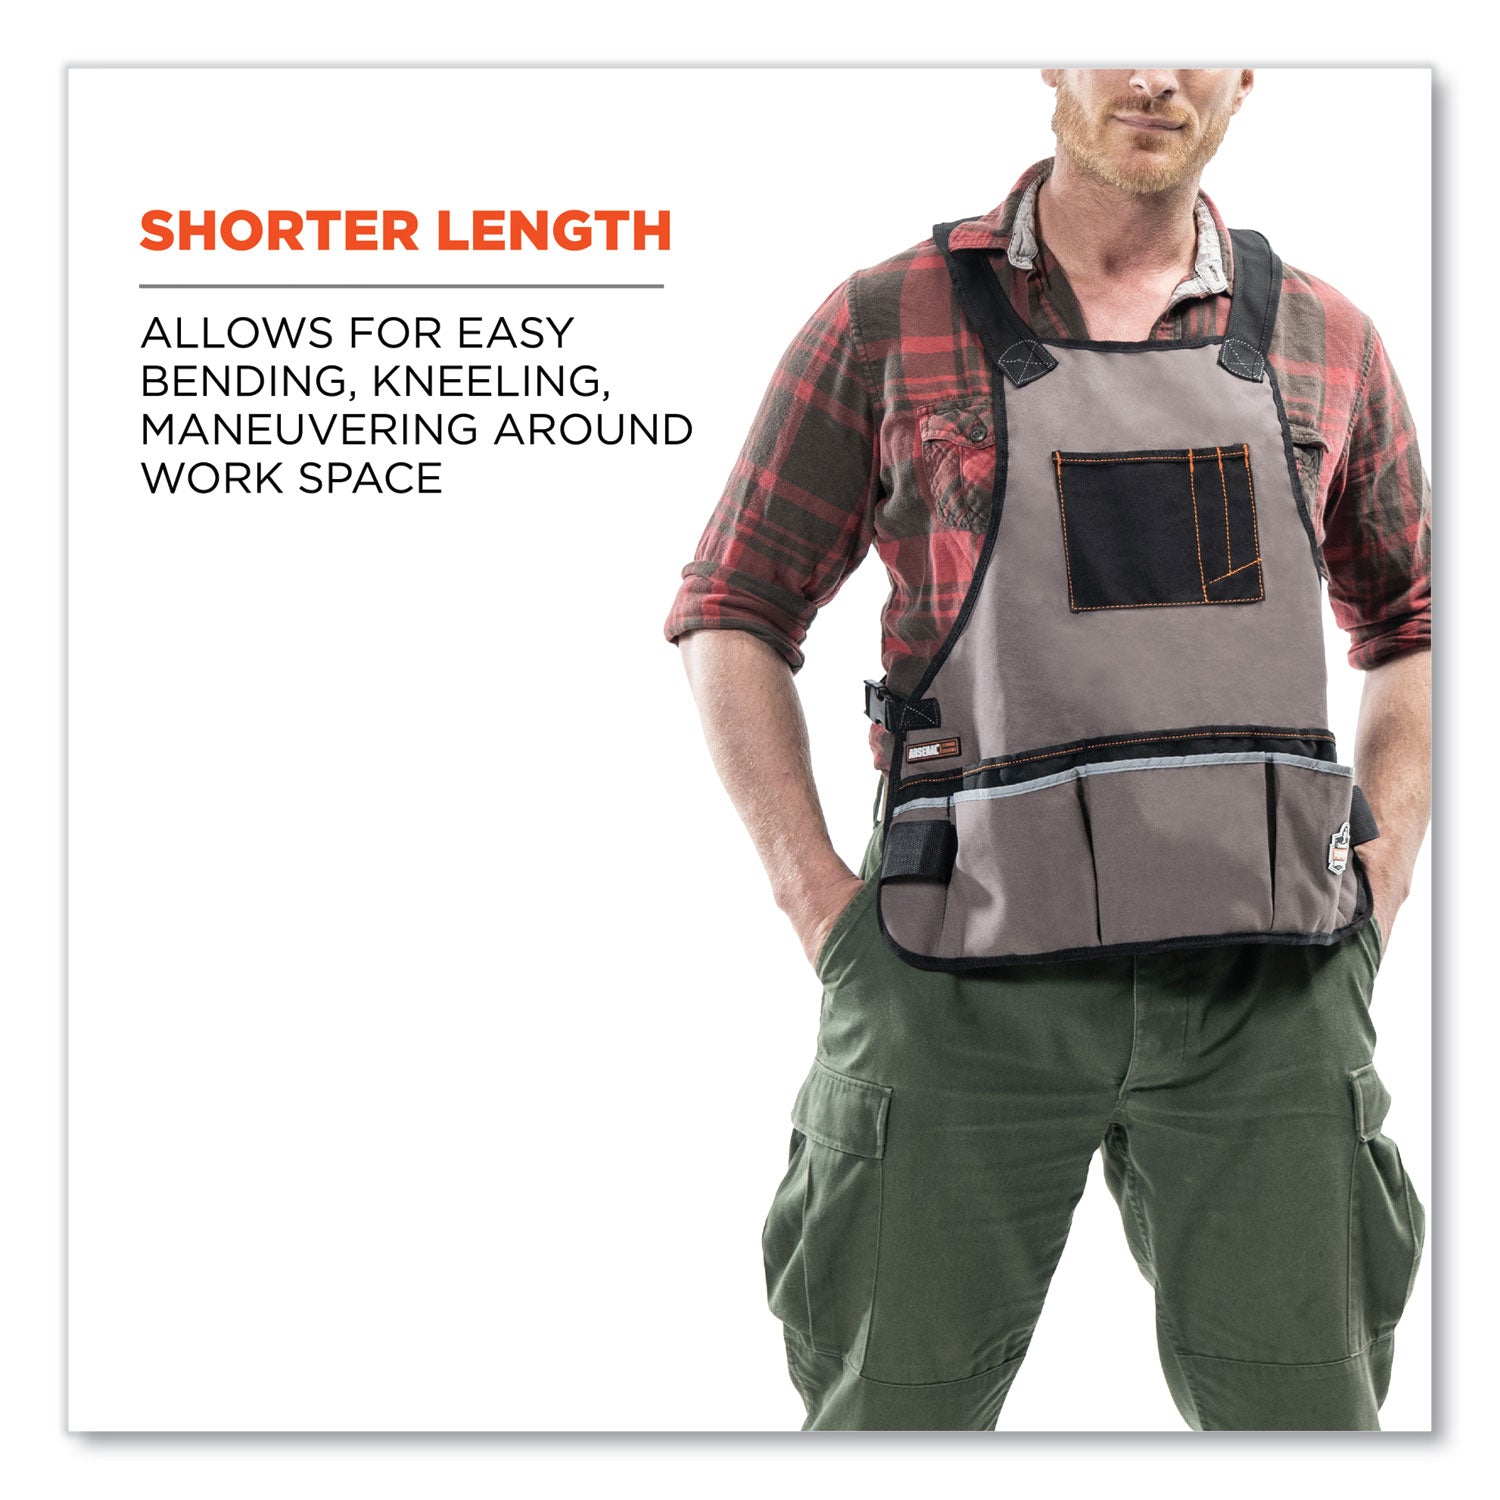 arsenal-5700-16-pocket-apron-16-compartments-208-x-236-canvas-gray-ships-in-1-3-business-days_ego13690 - 3